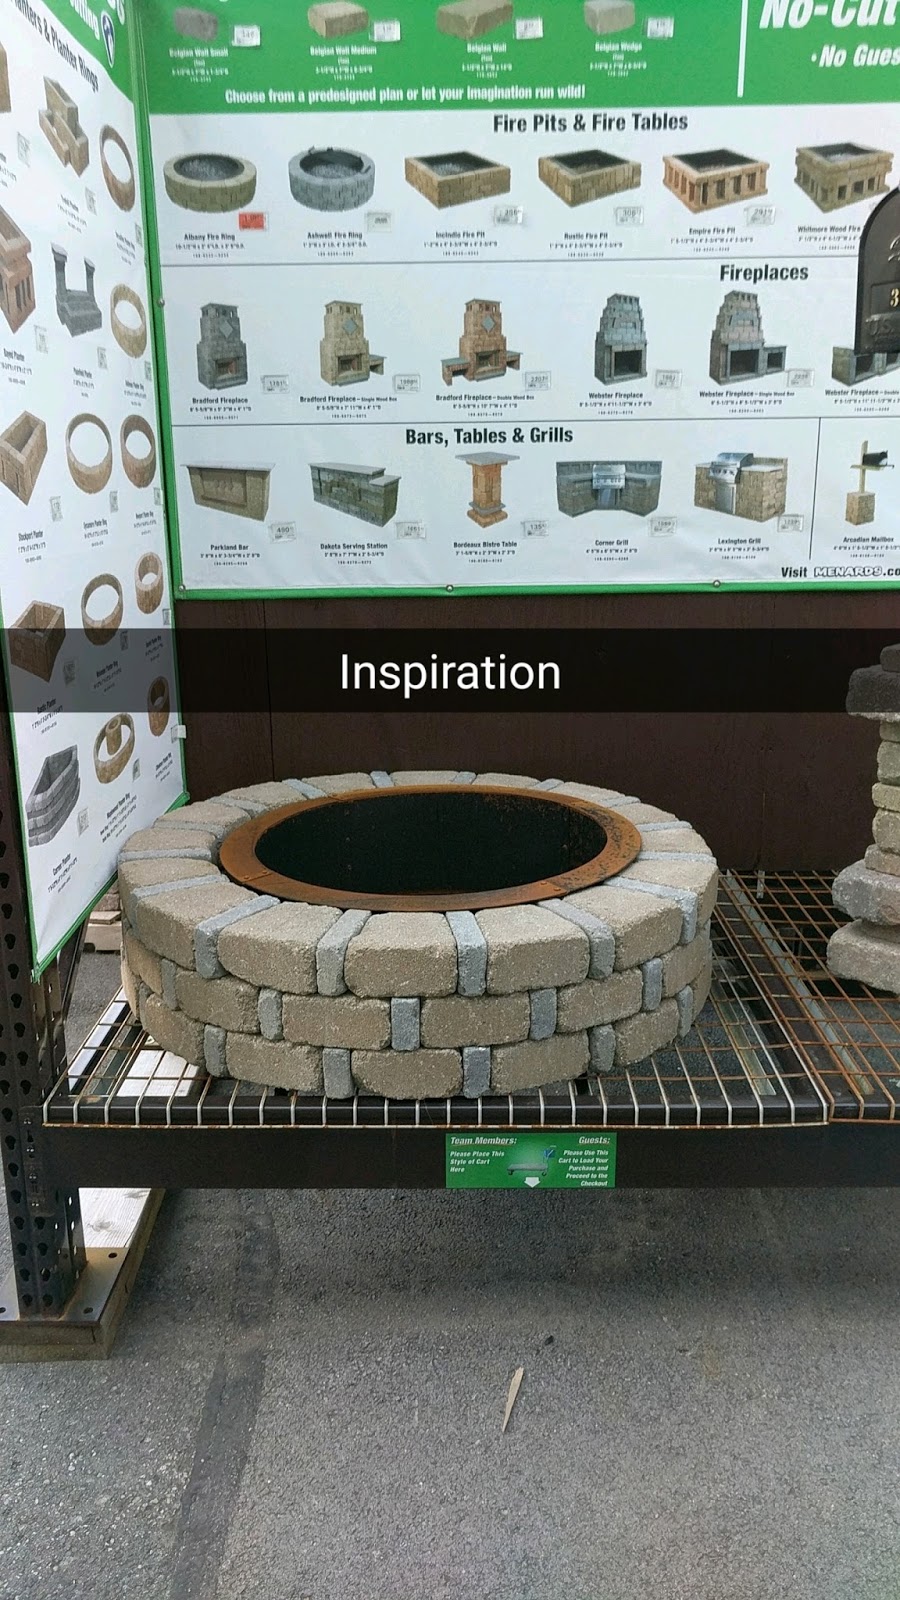 Diy Brick Fire Pit For Only 80, Outdoor Portable Fire Pit Menards